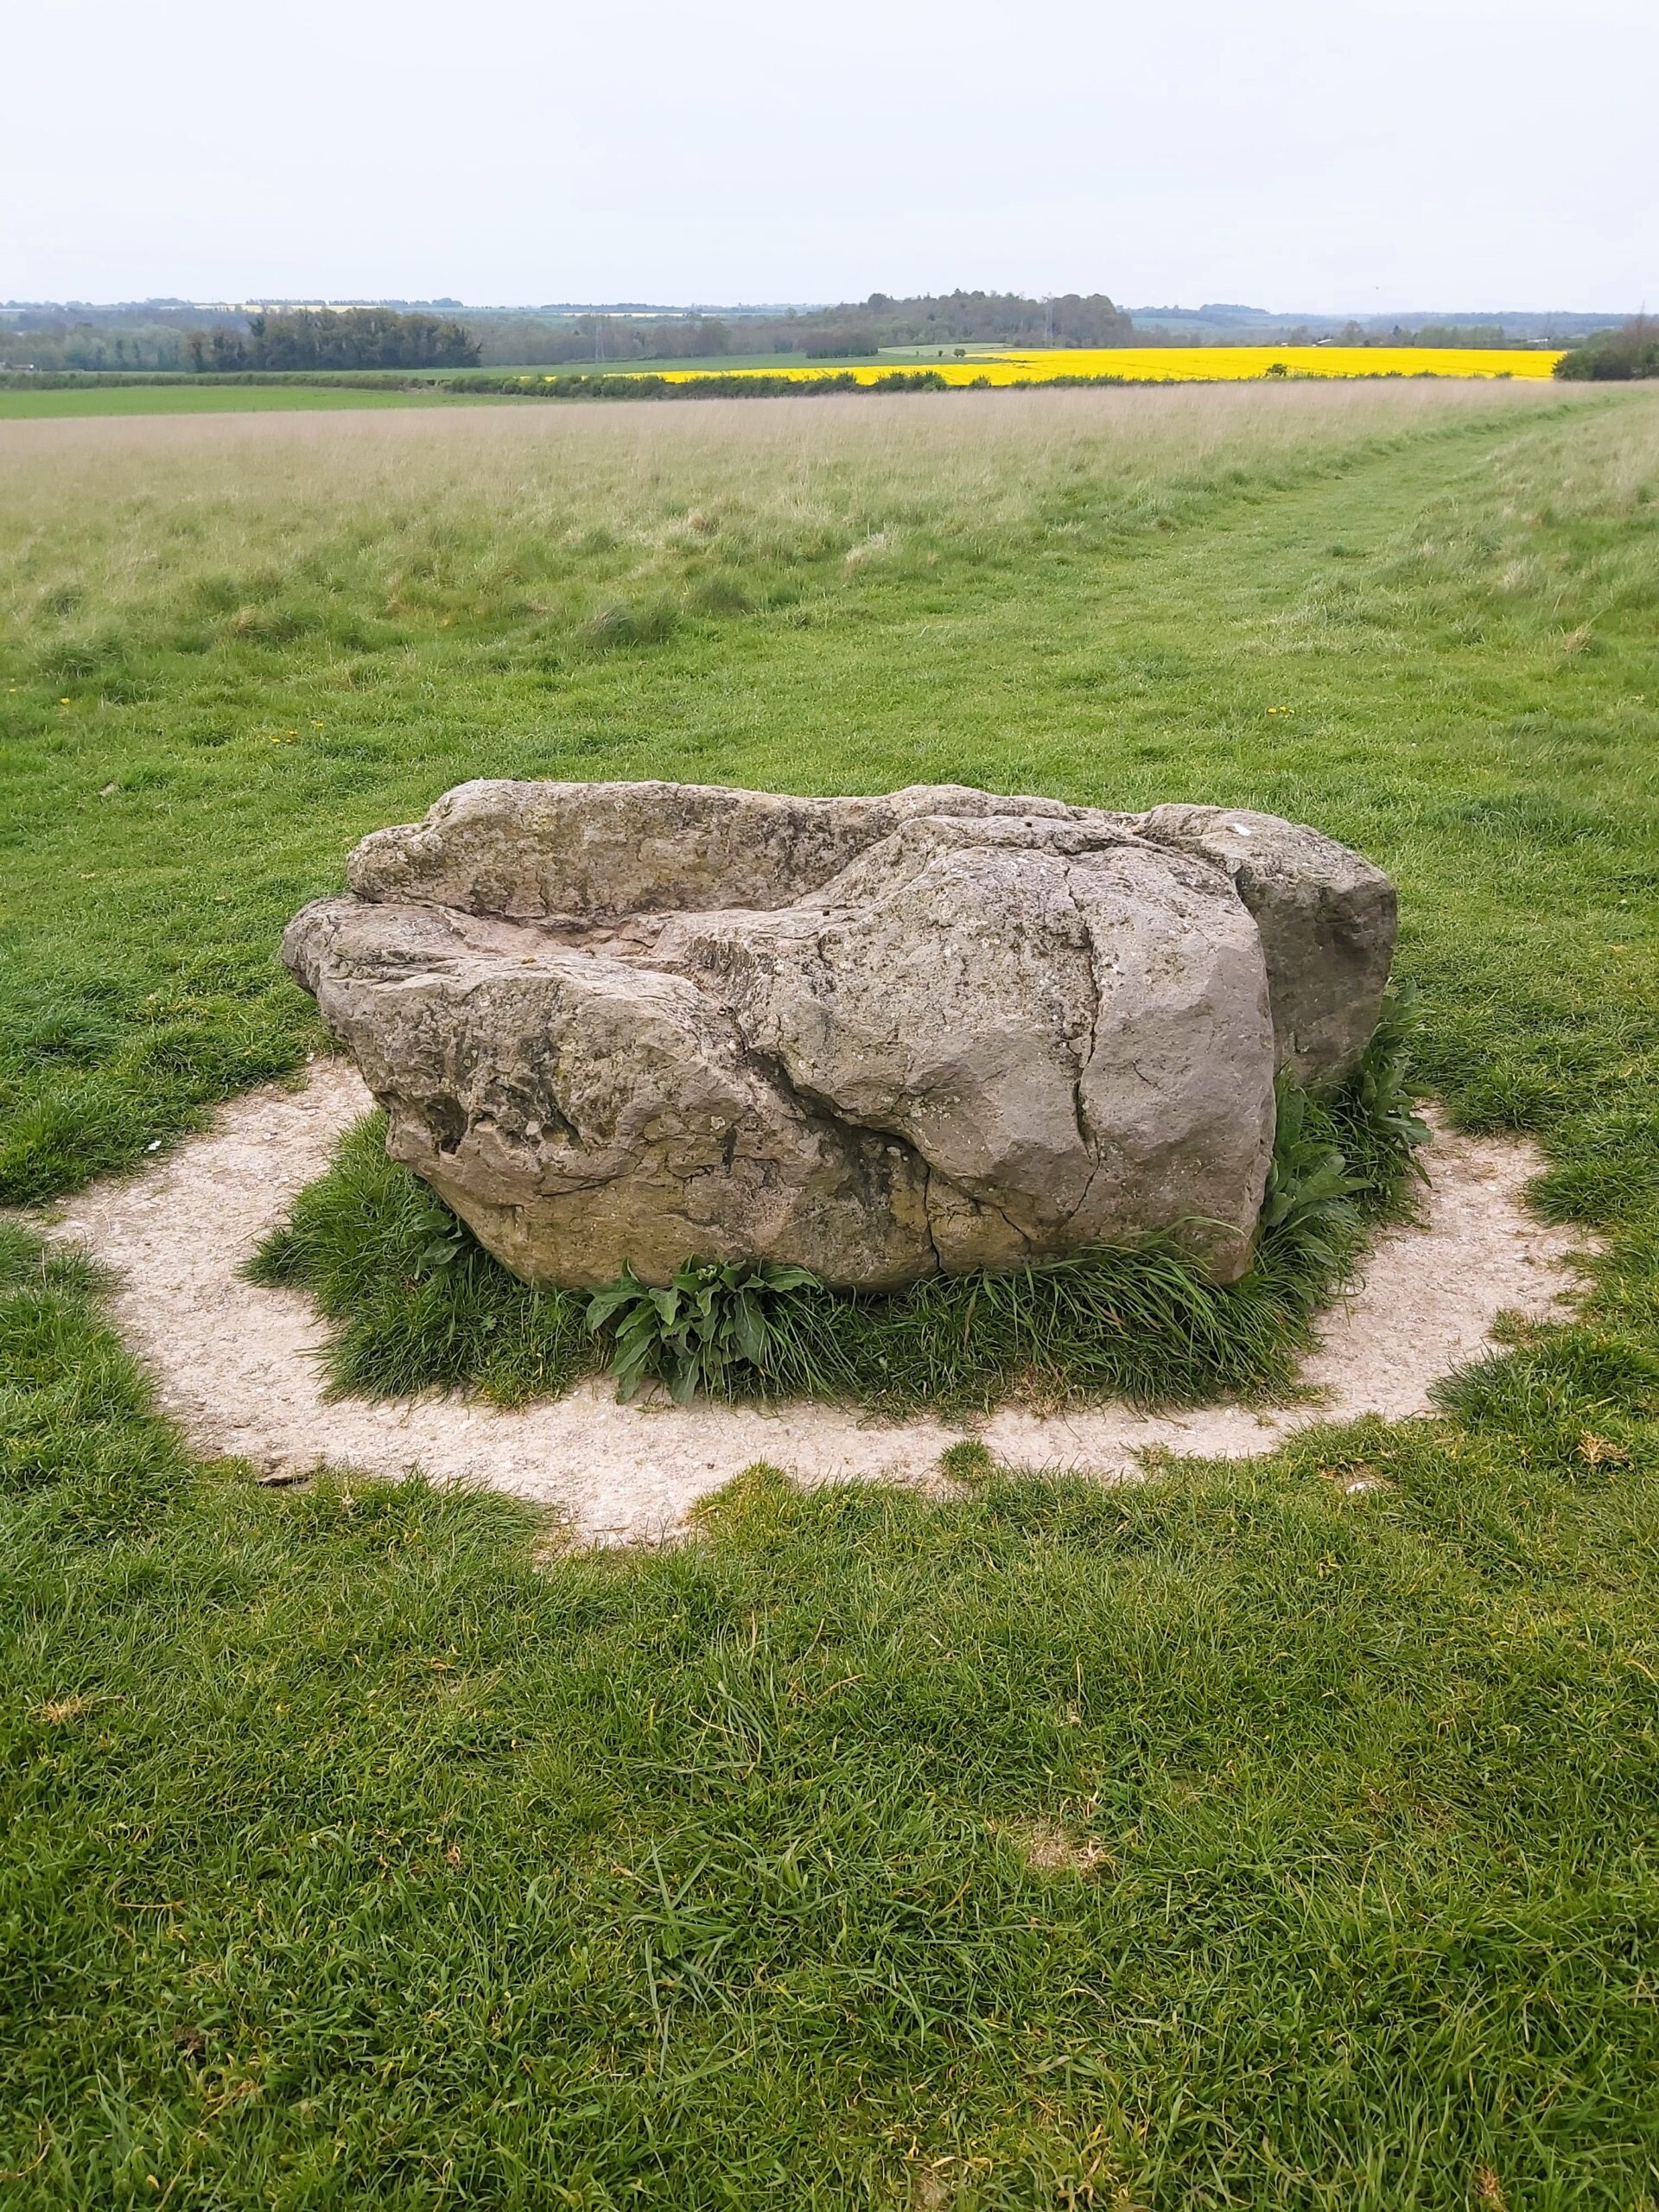 The Cuckoo Stone, a Neolithic or Bronze Age standing stone in a field near Woodhenge, England